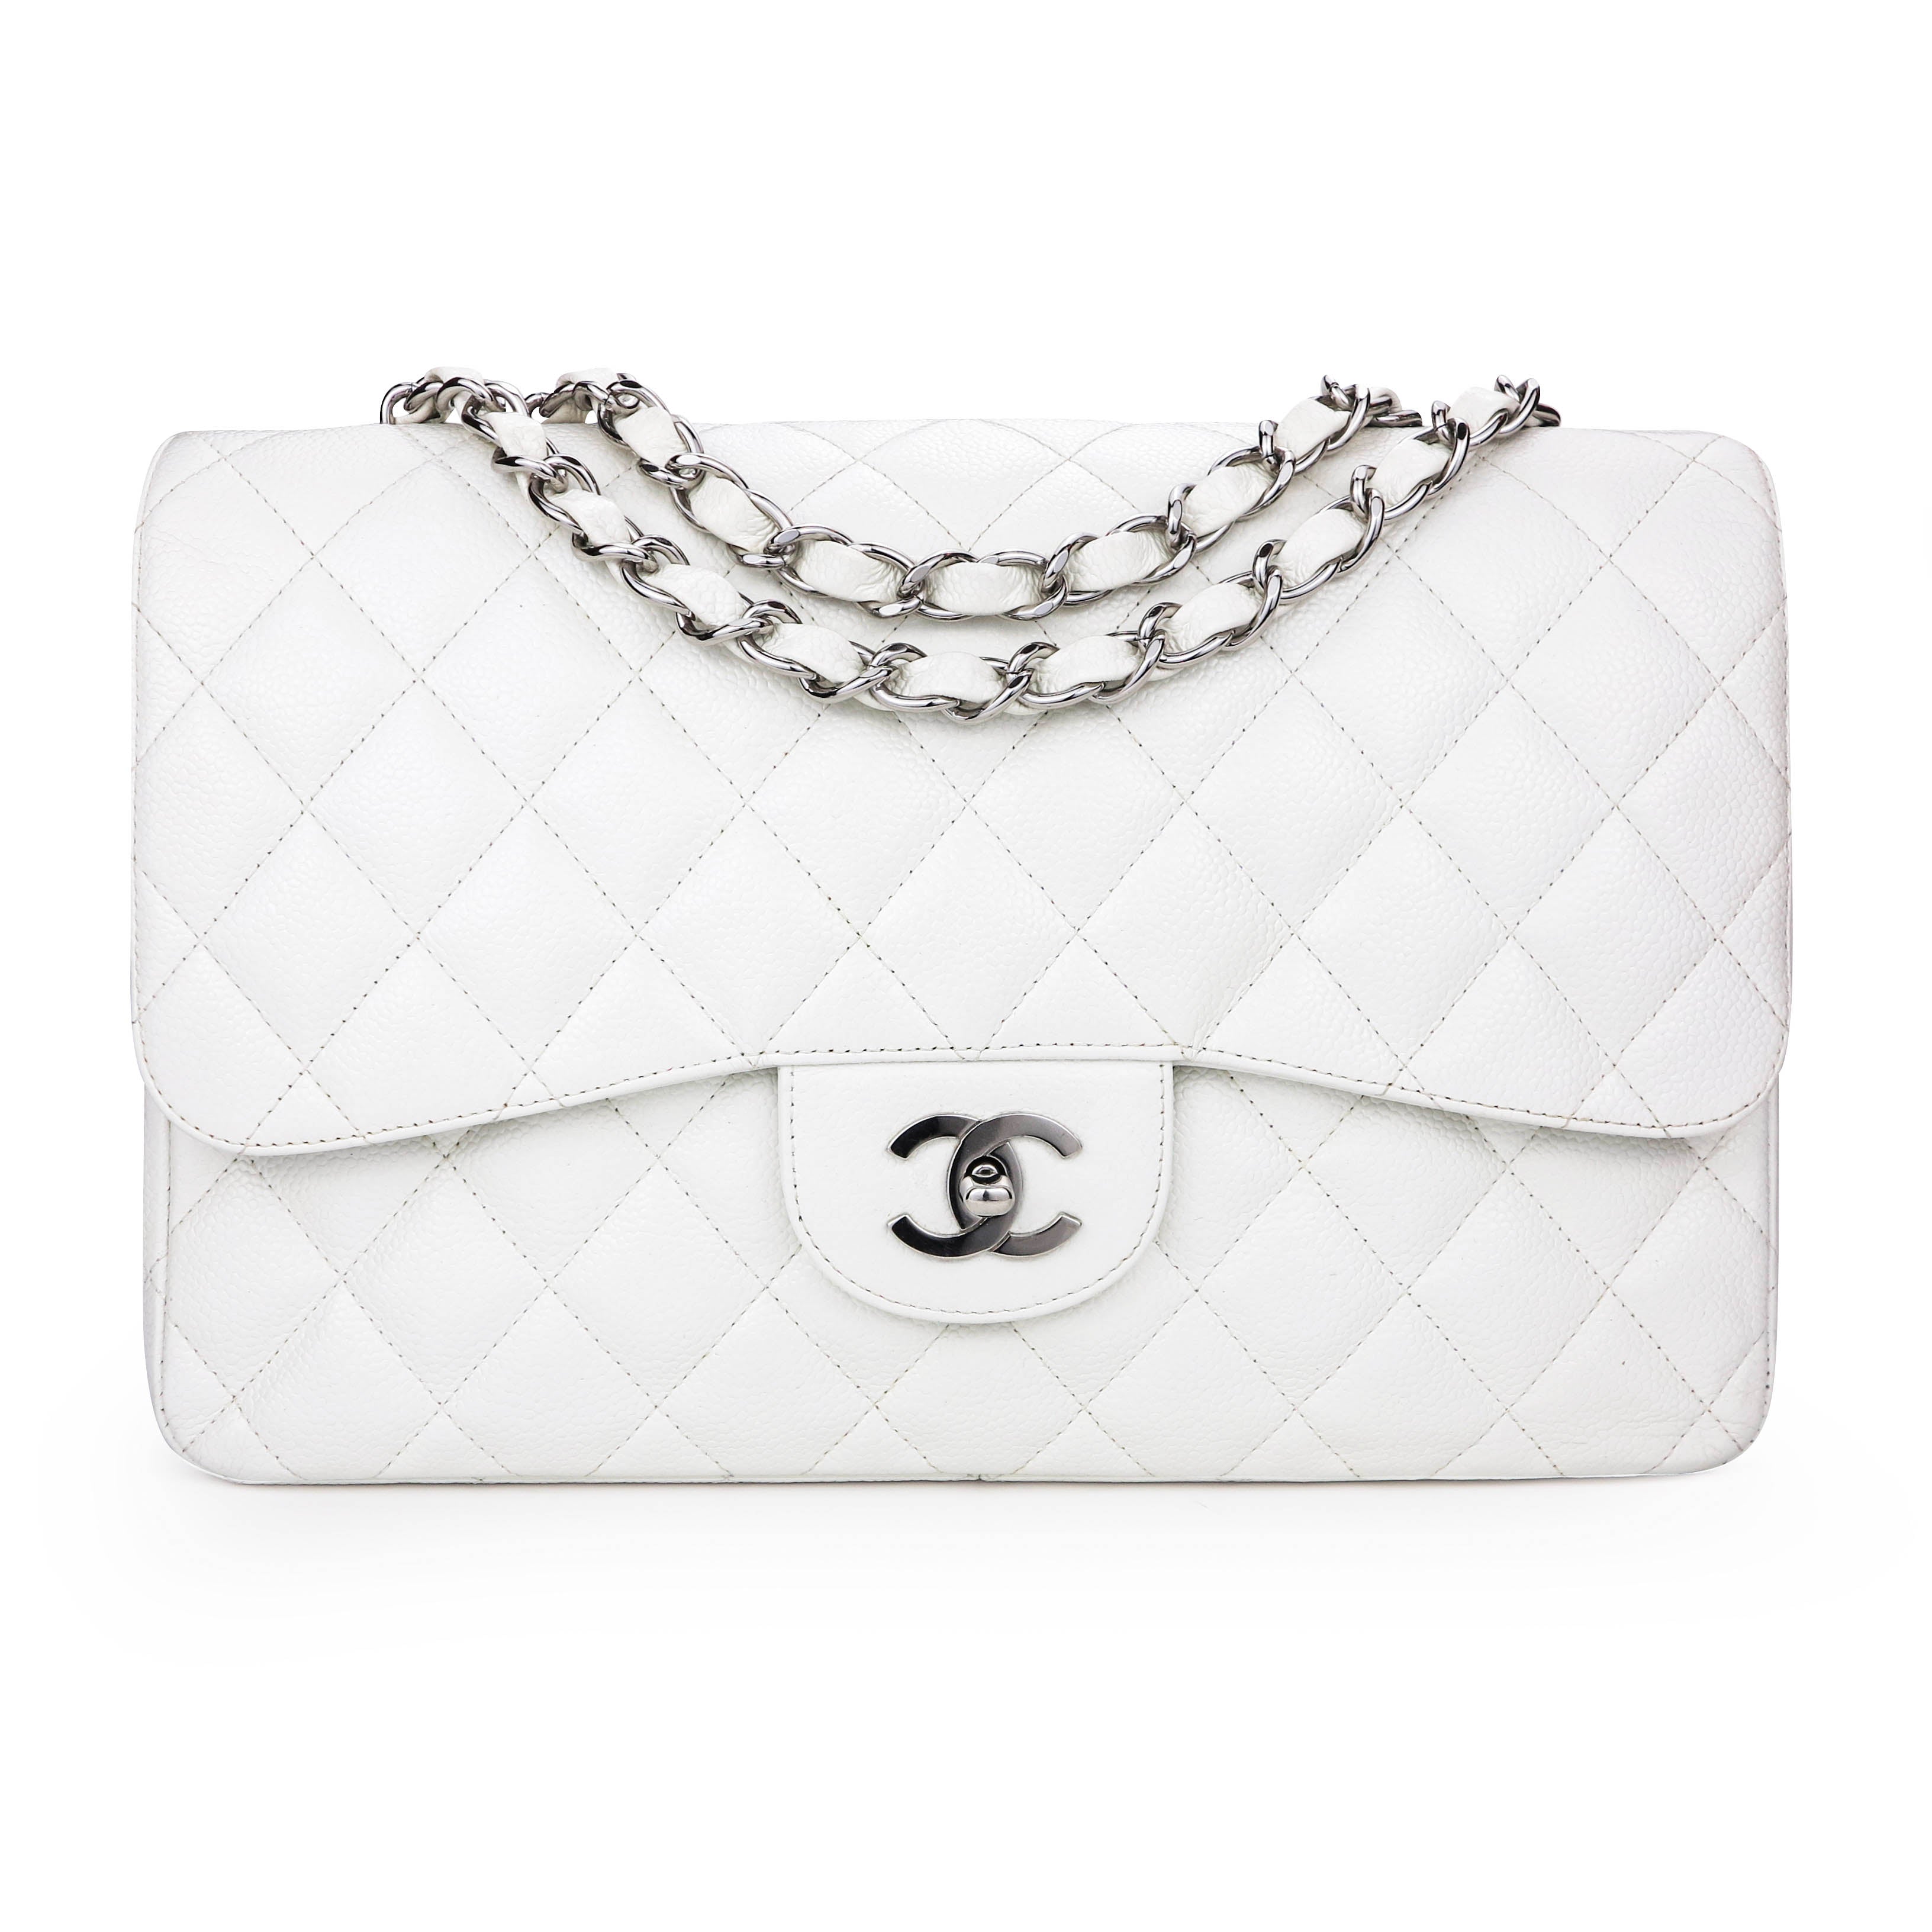 Chanel White Caviar Leather Jumbo Double Flap Bag with Gold